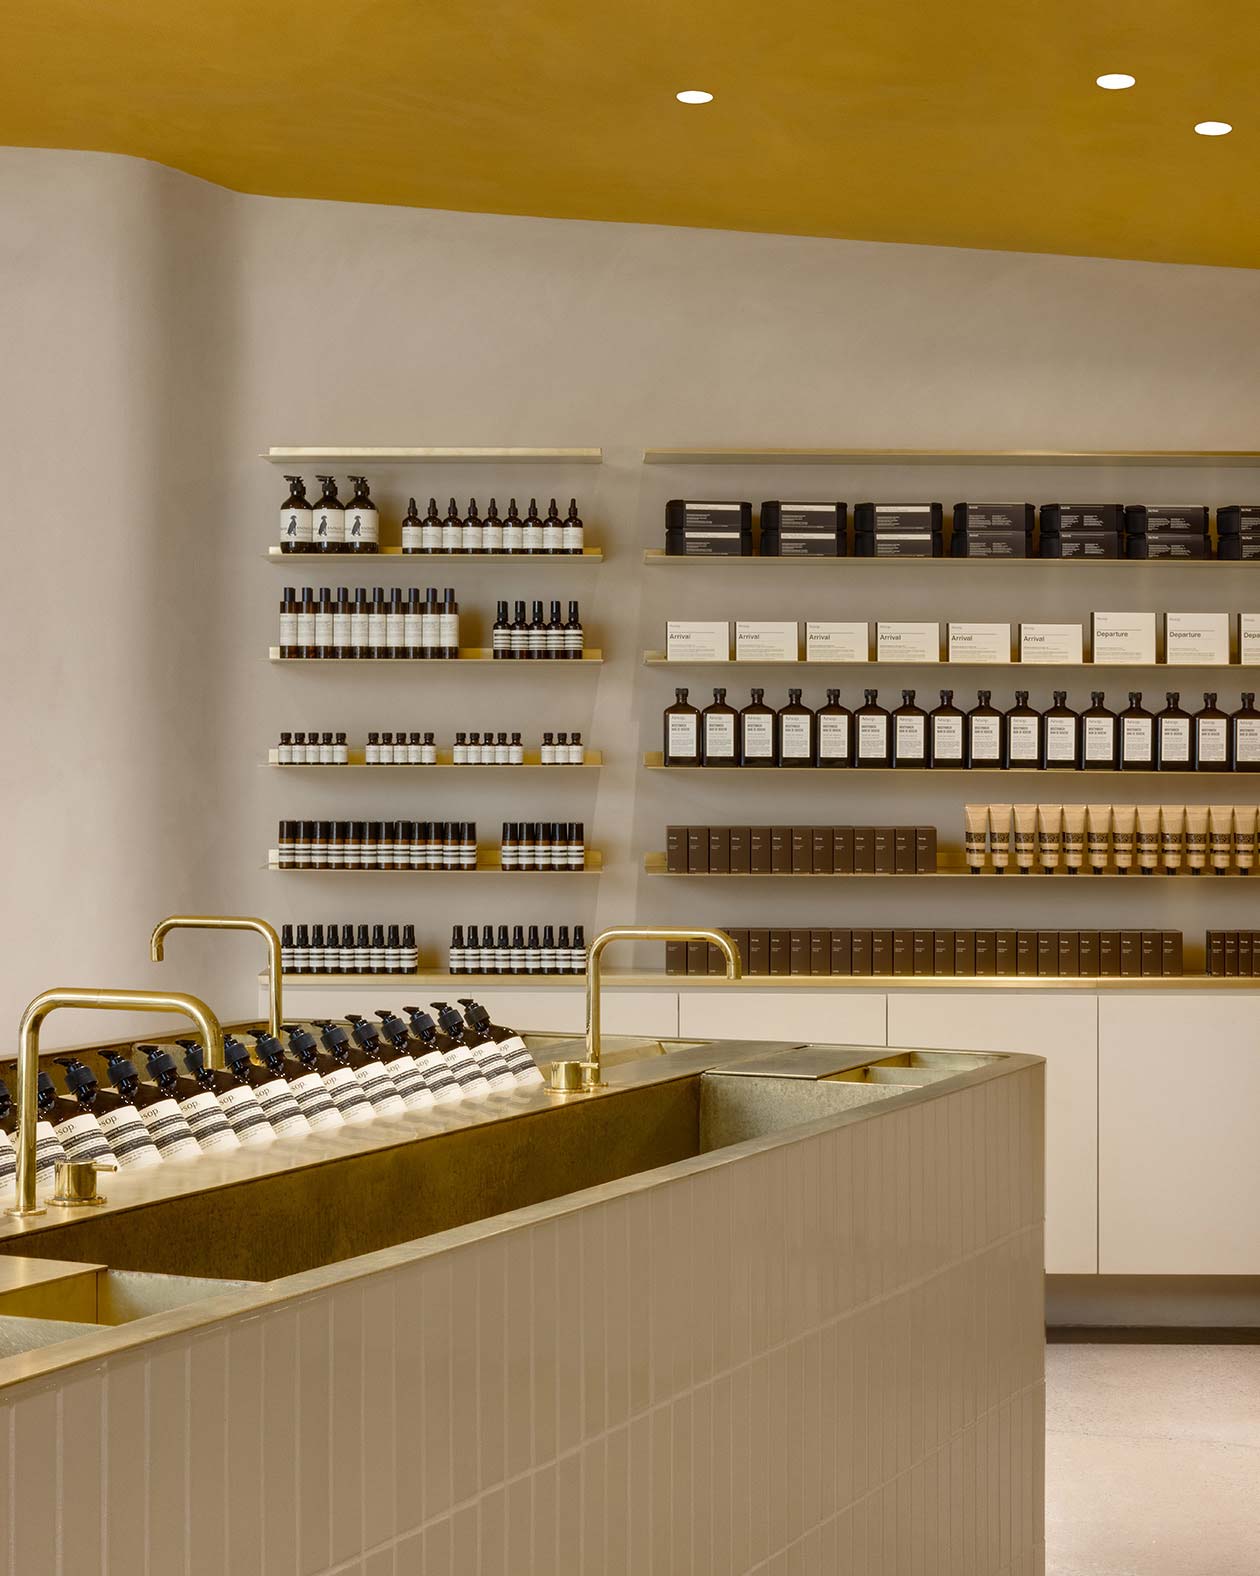 A sink fitted with a brass tap and countertop in the foreground; shelves of Aesop product are neatly arranged on the shelves in the background. 